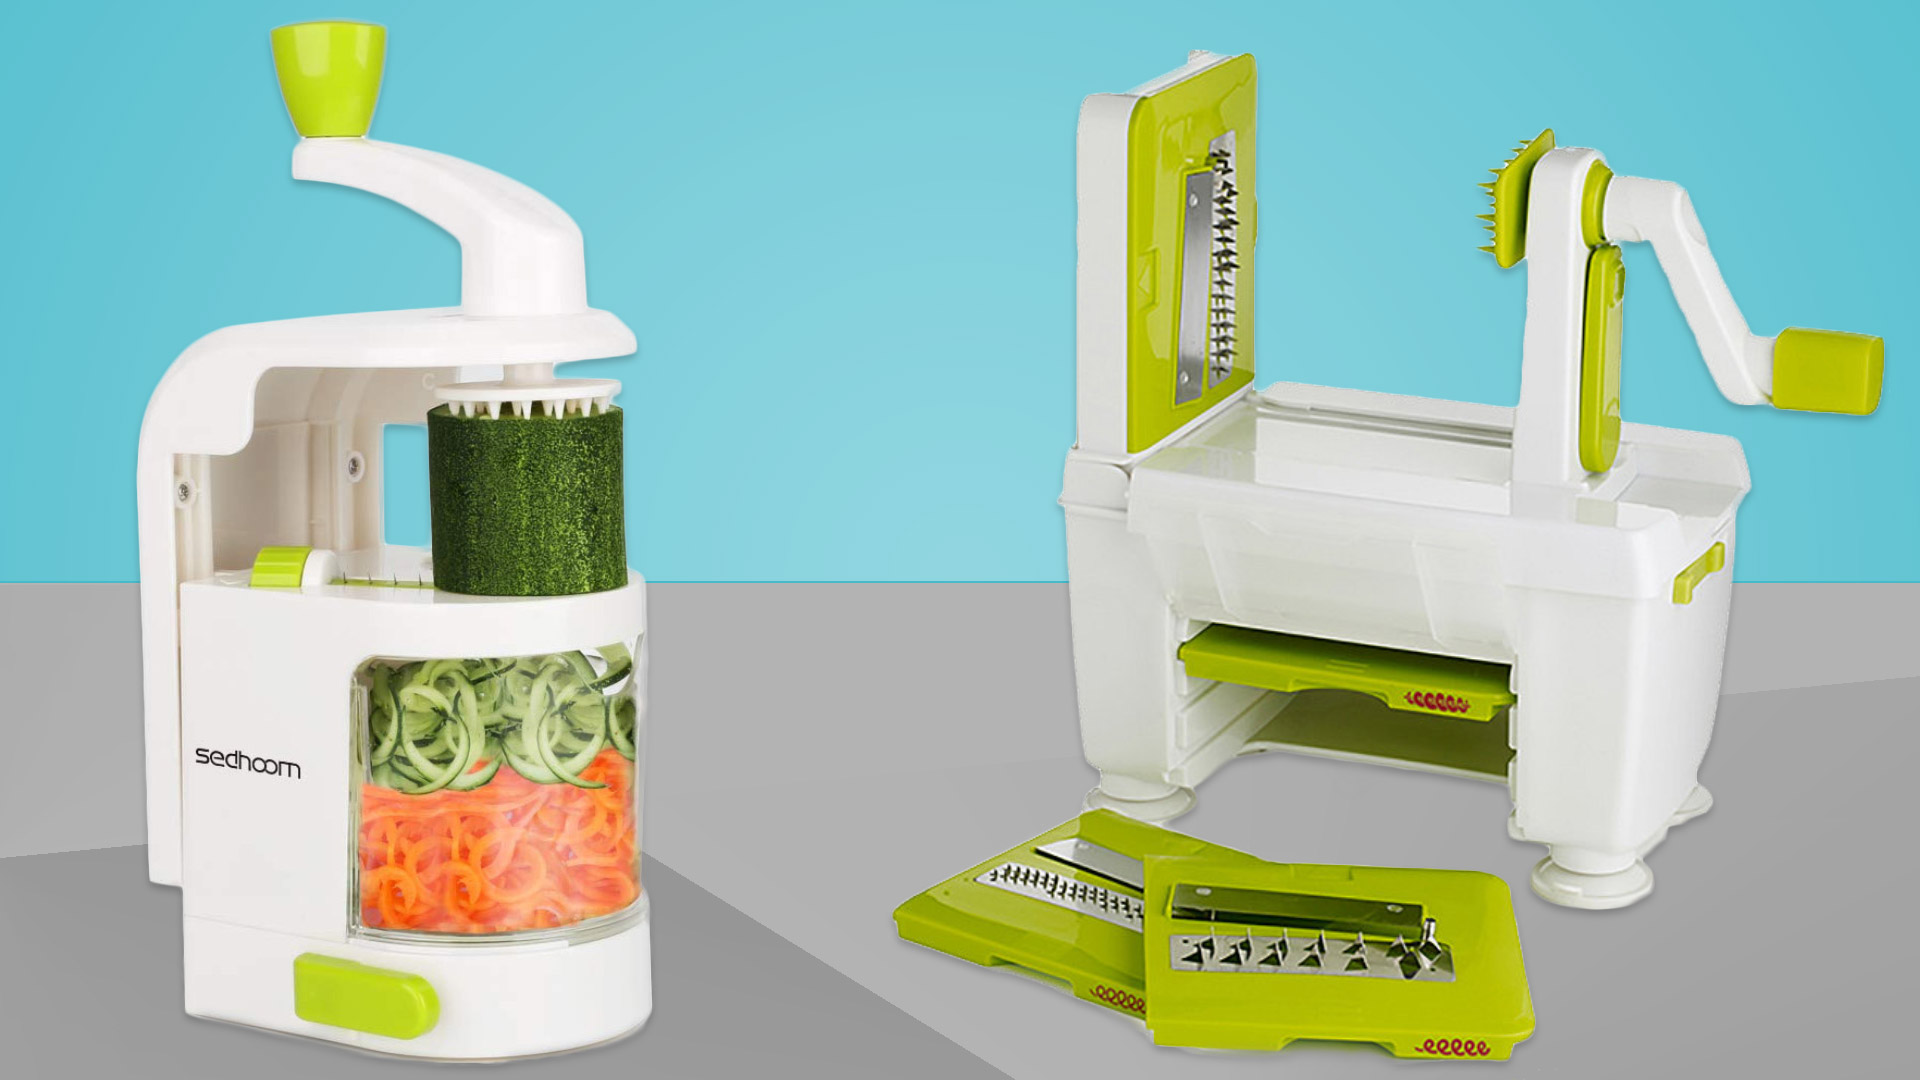 Kenwood Electric Spiralizer. Good as new, simple to use and clean